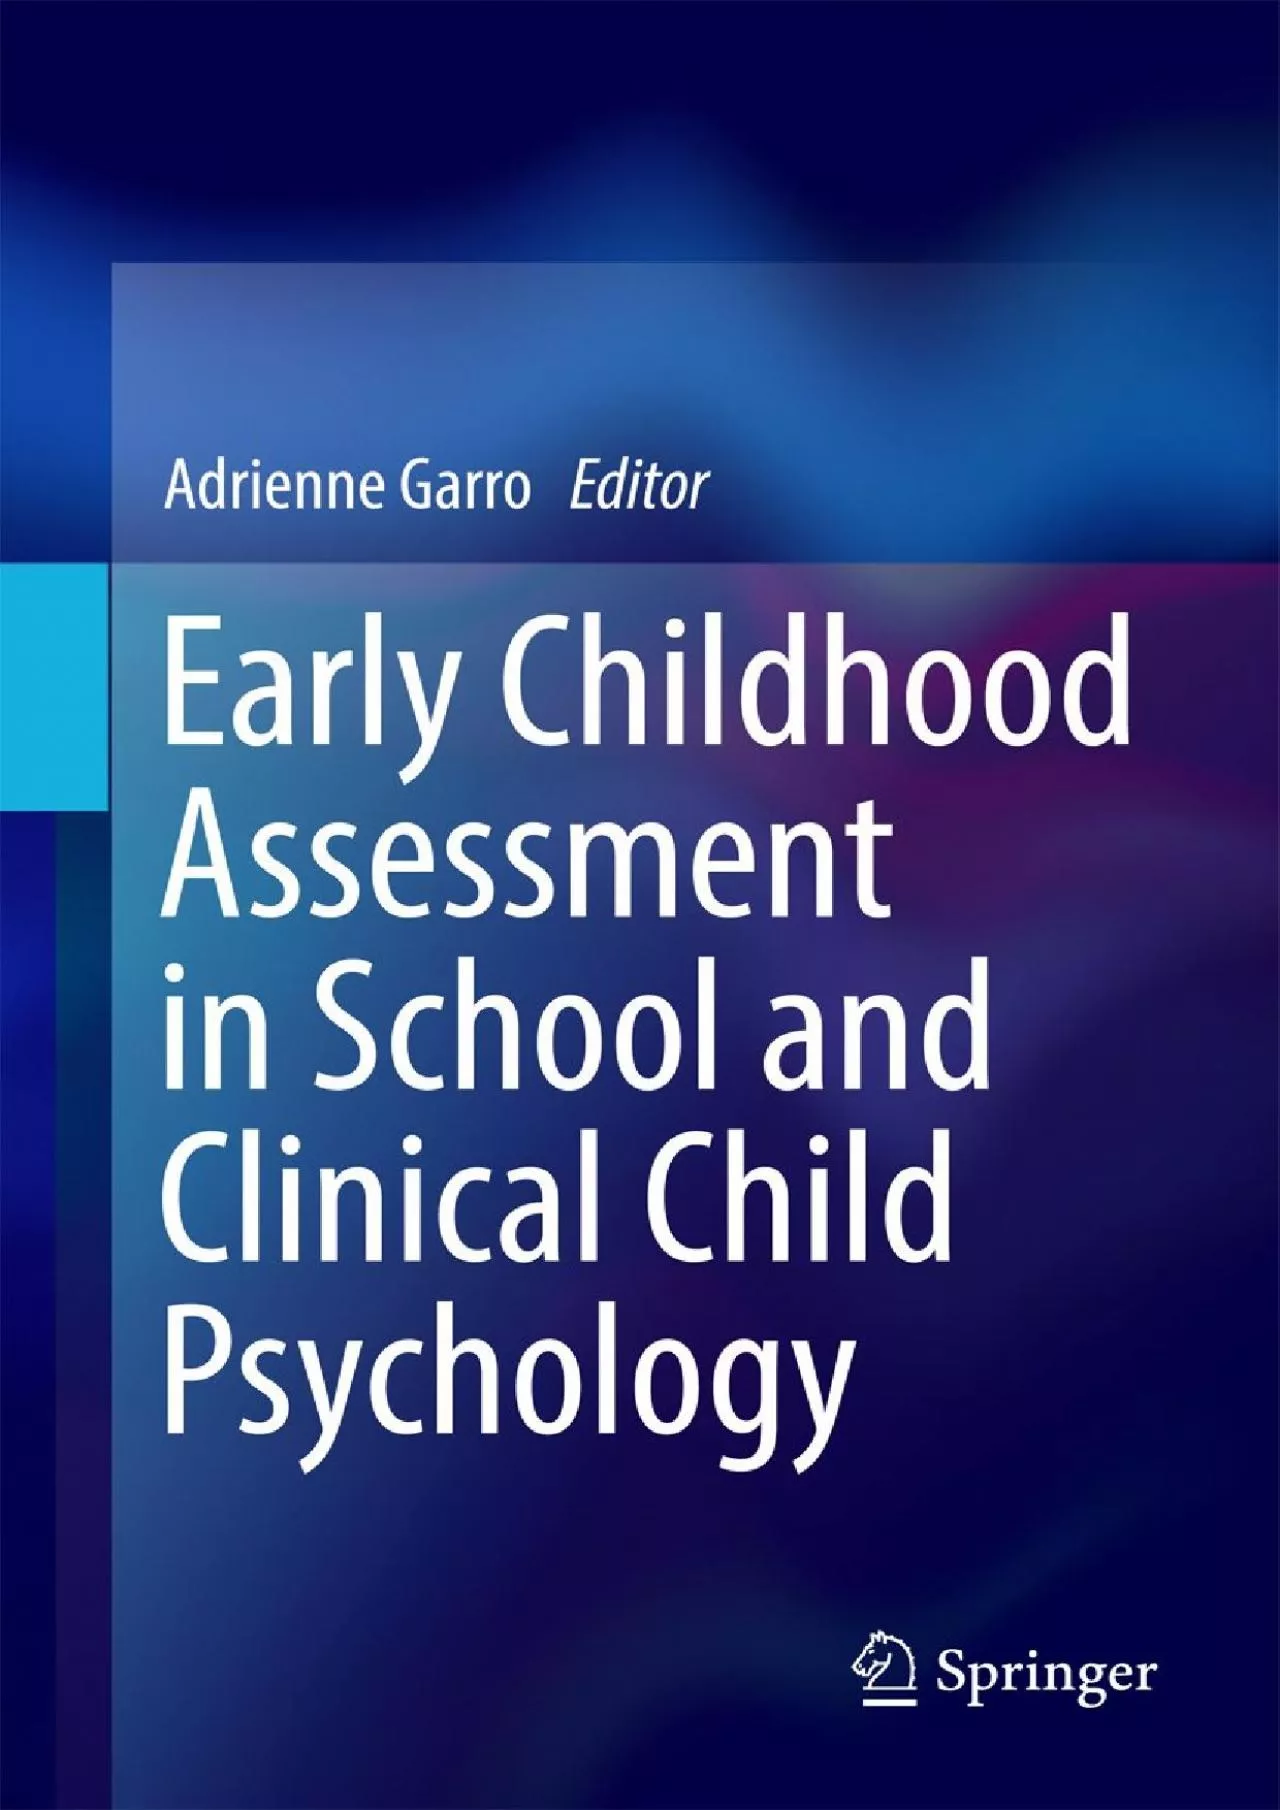 (BOOK)-Early Childhood Assessment in School and Clinical Child Psychology